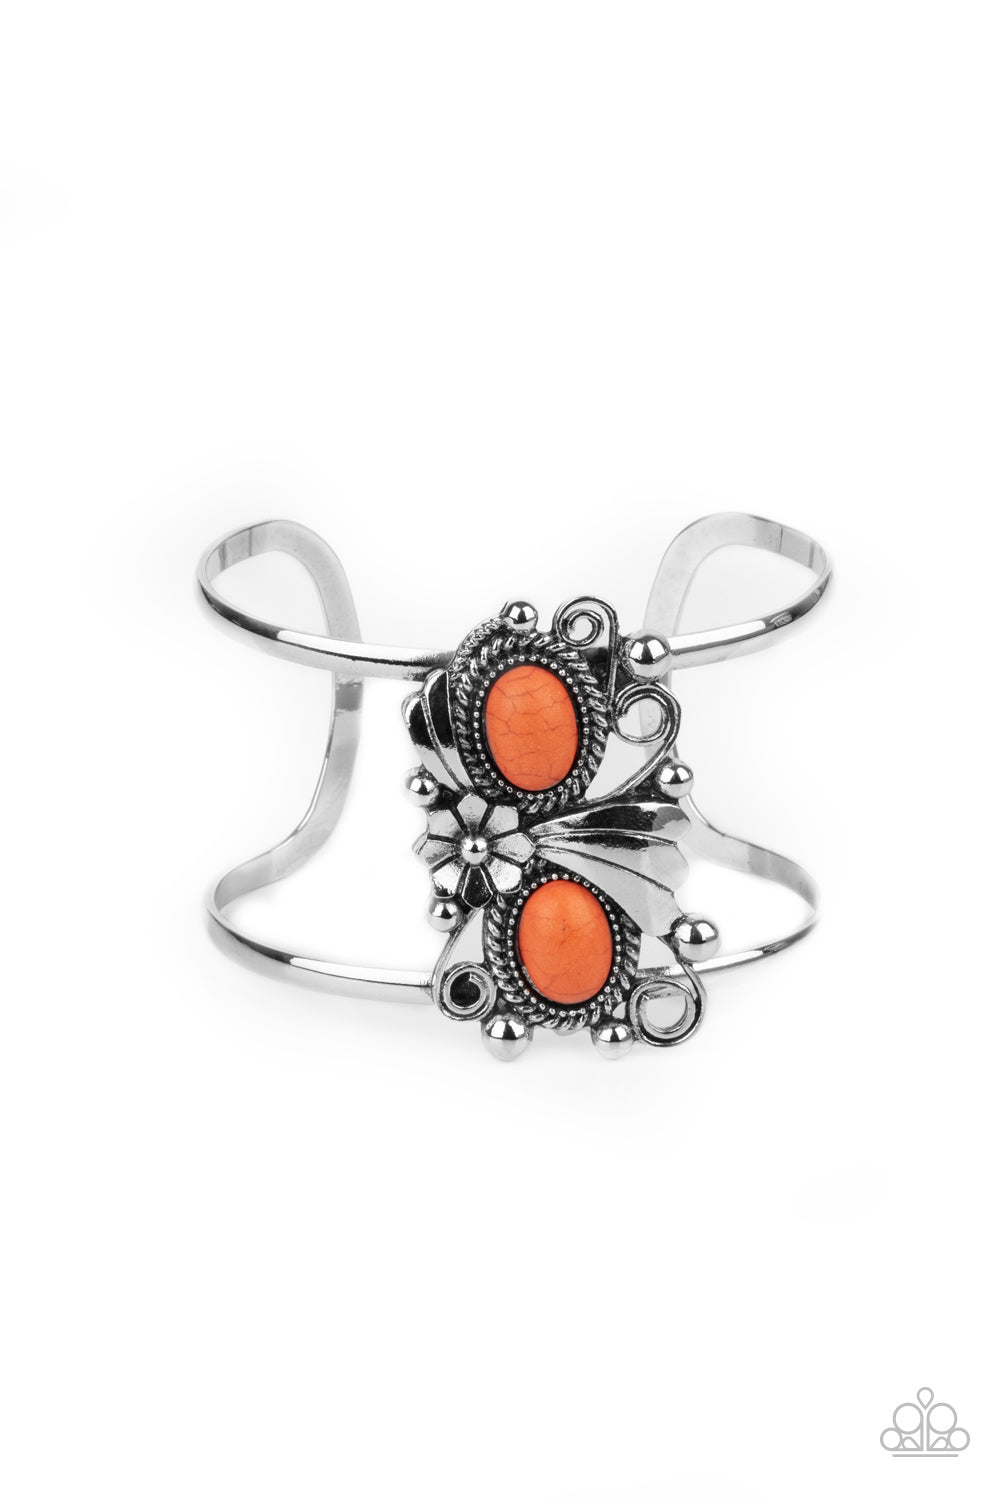 A leafy silver flower blooms between two oval orange stones atop a studded and filigree filled backdrop, creating a subtly slanted centerpiece across the airy silver cuff.